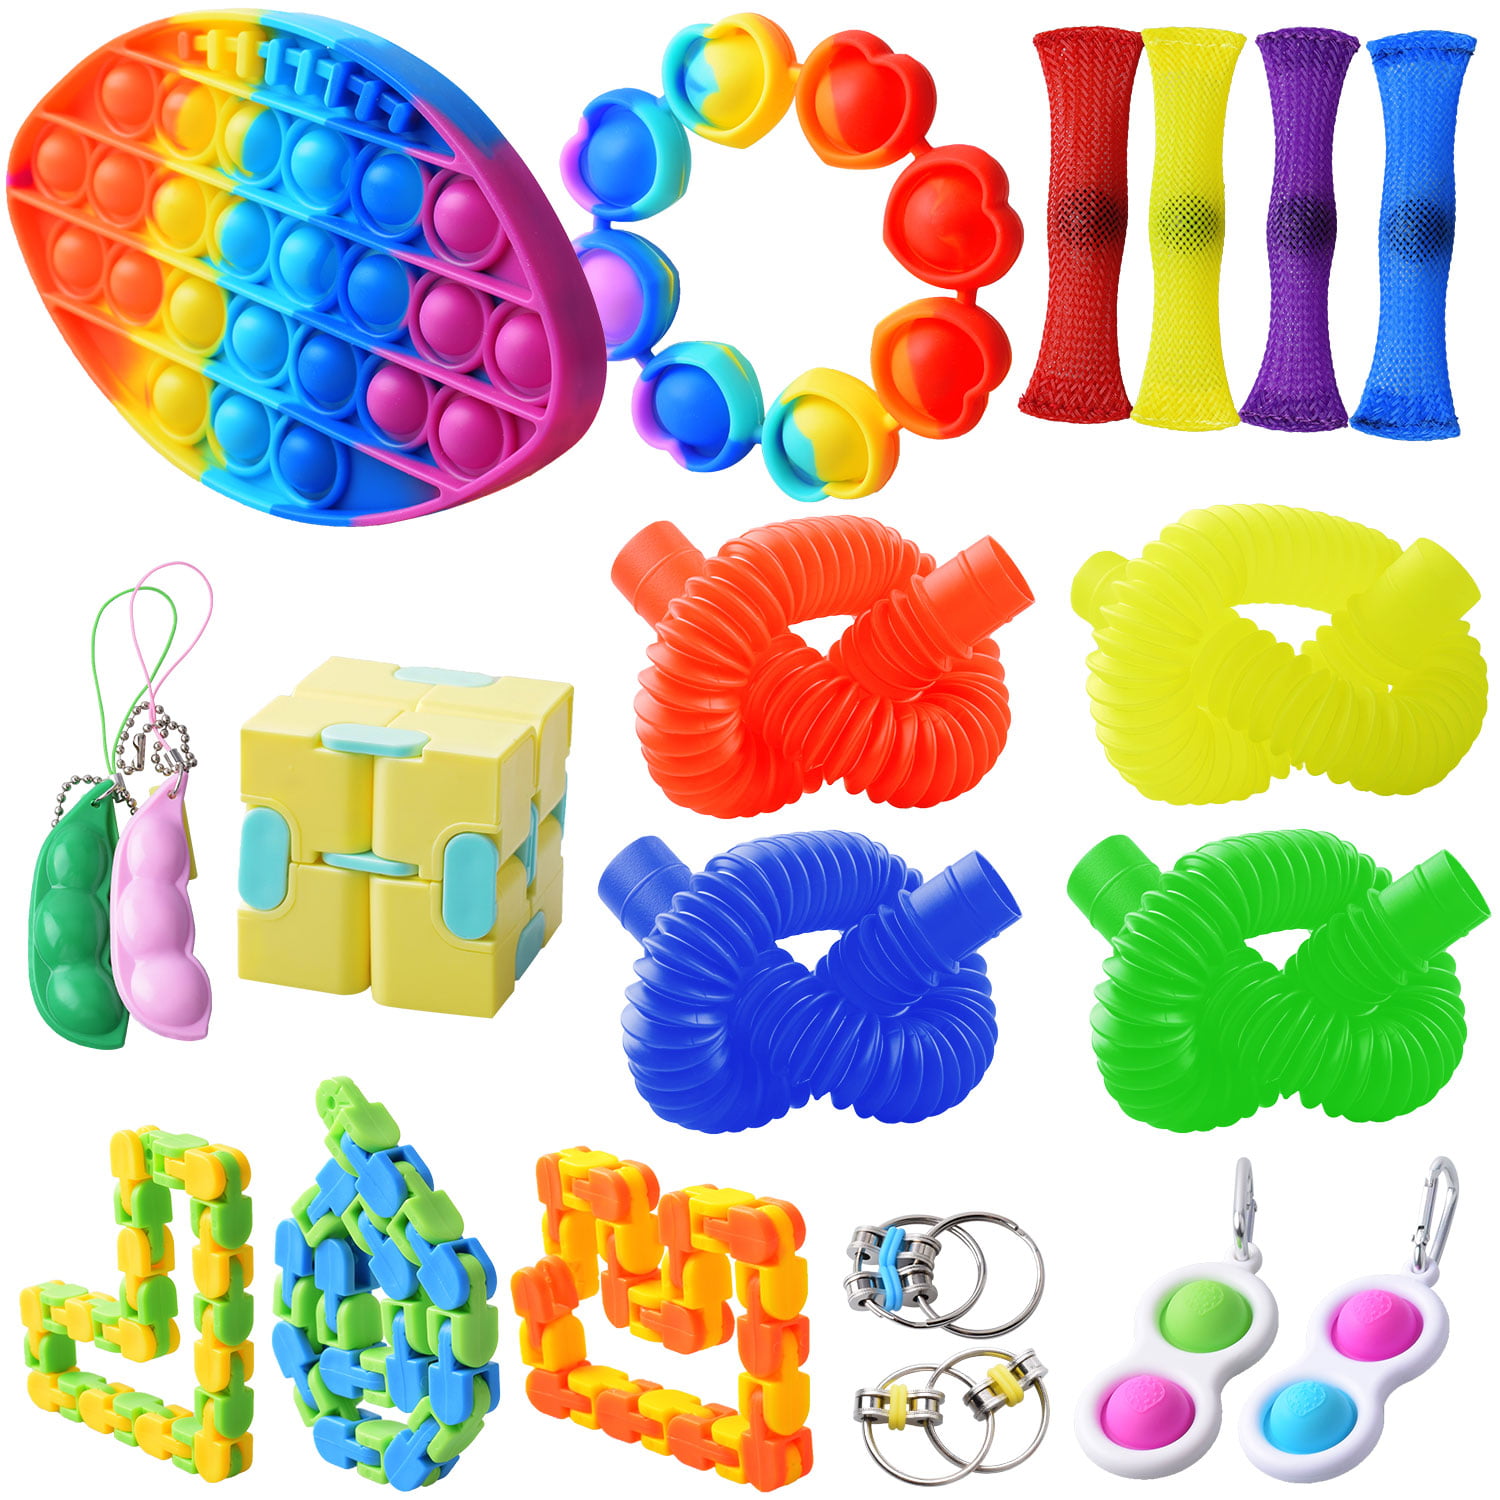 JVIGUE Sensory Toys Set 15 Pack Stress Relief Hand Fidget Toys for Kids and ... 